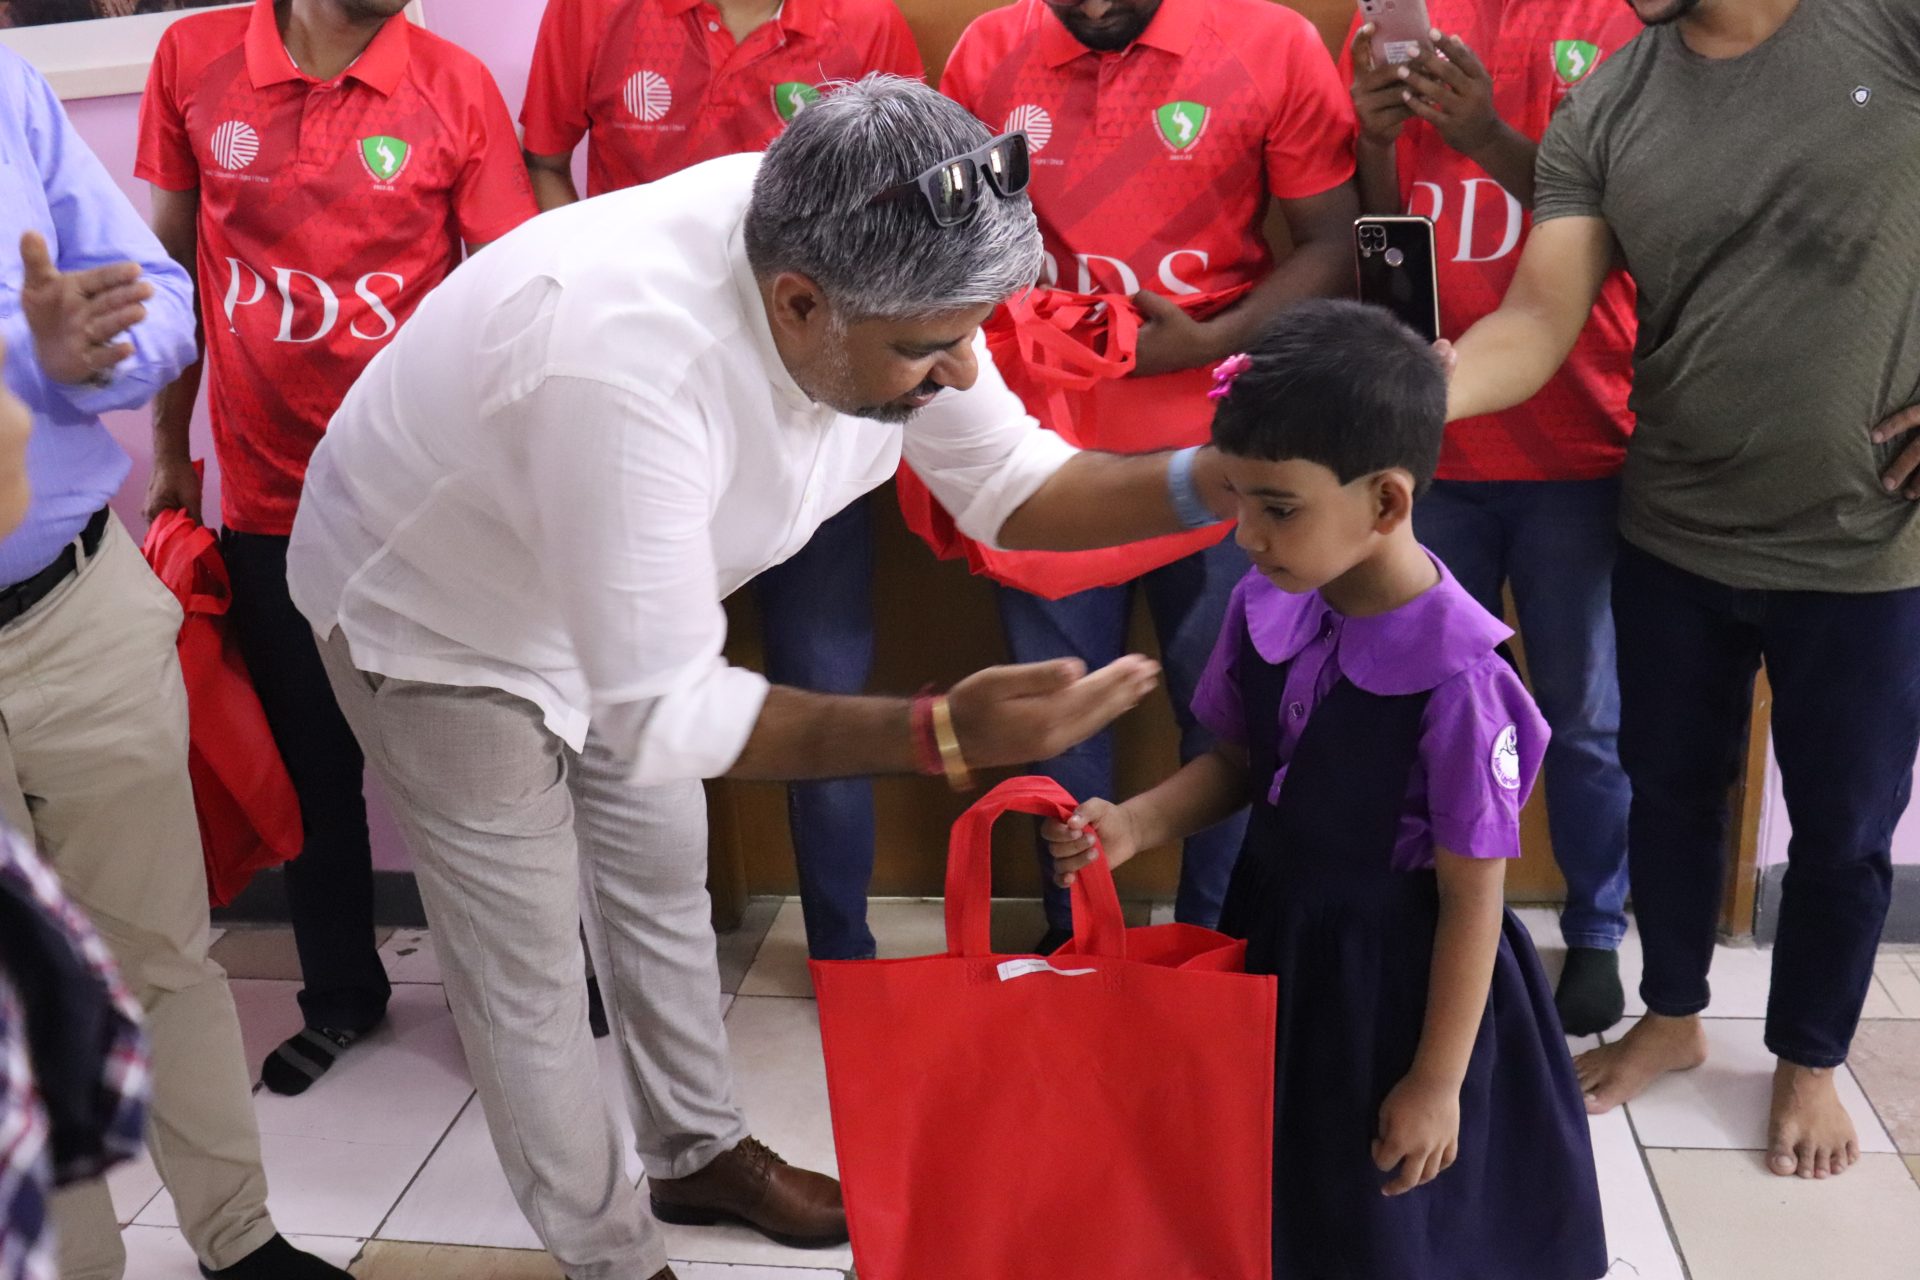 PoeticGem’s distribution of Eid clothes for all students and school team members